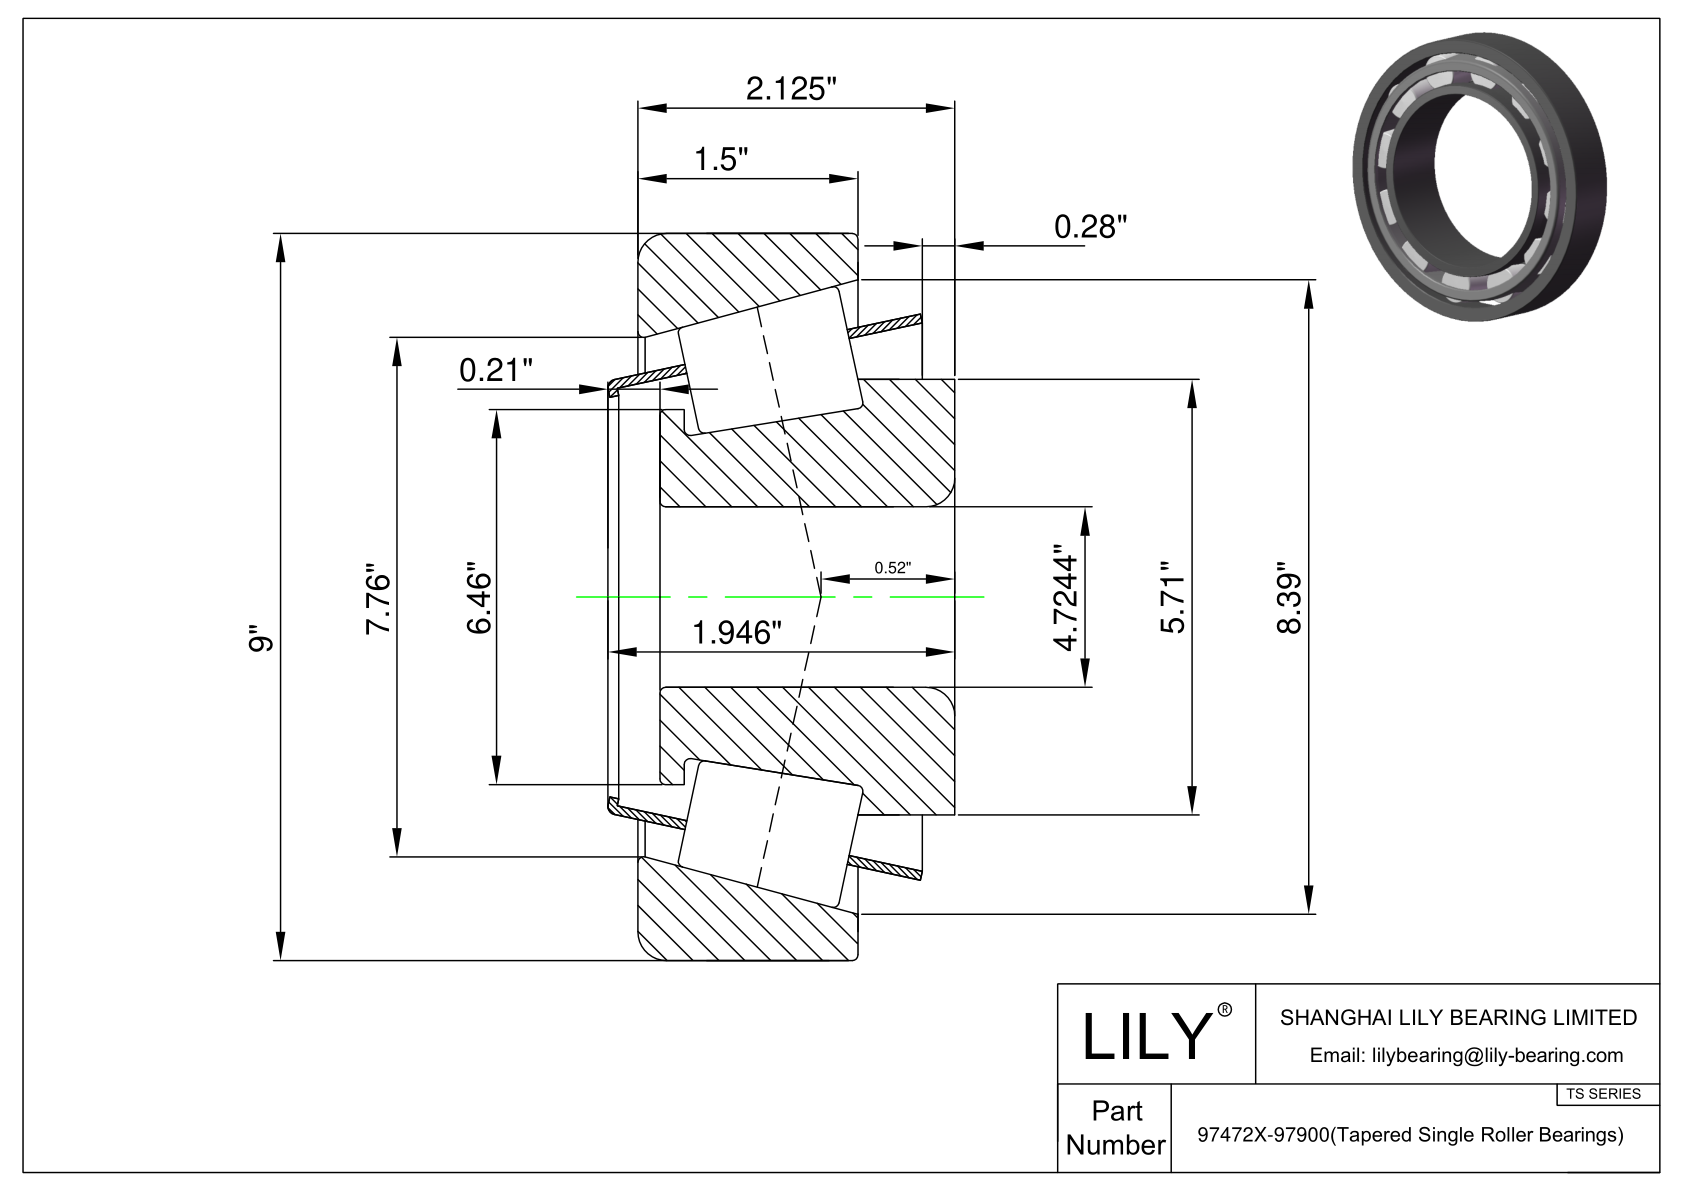 97472X-97900 TS (Tapered Single Roller Bearings) (Imperial) cad drawing